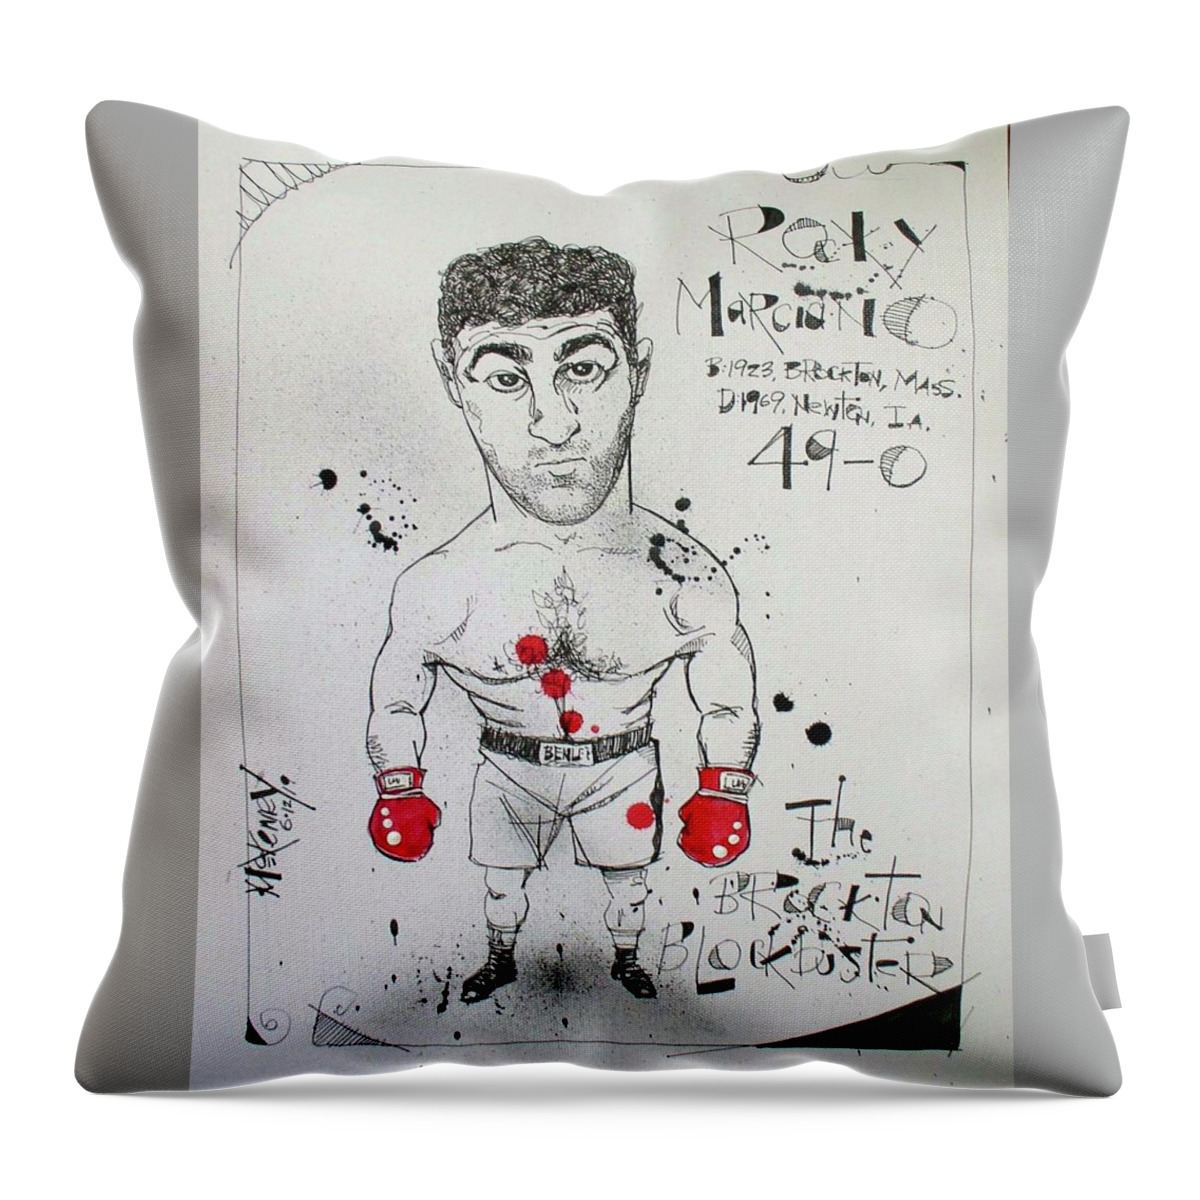  Throw Pillow featuring the photograph Rocky Marciano by Phil Mckenney